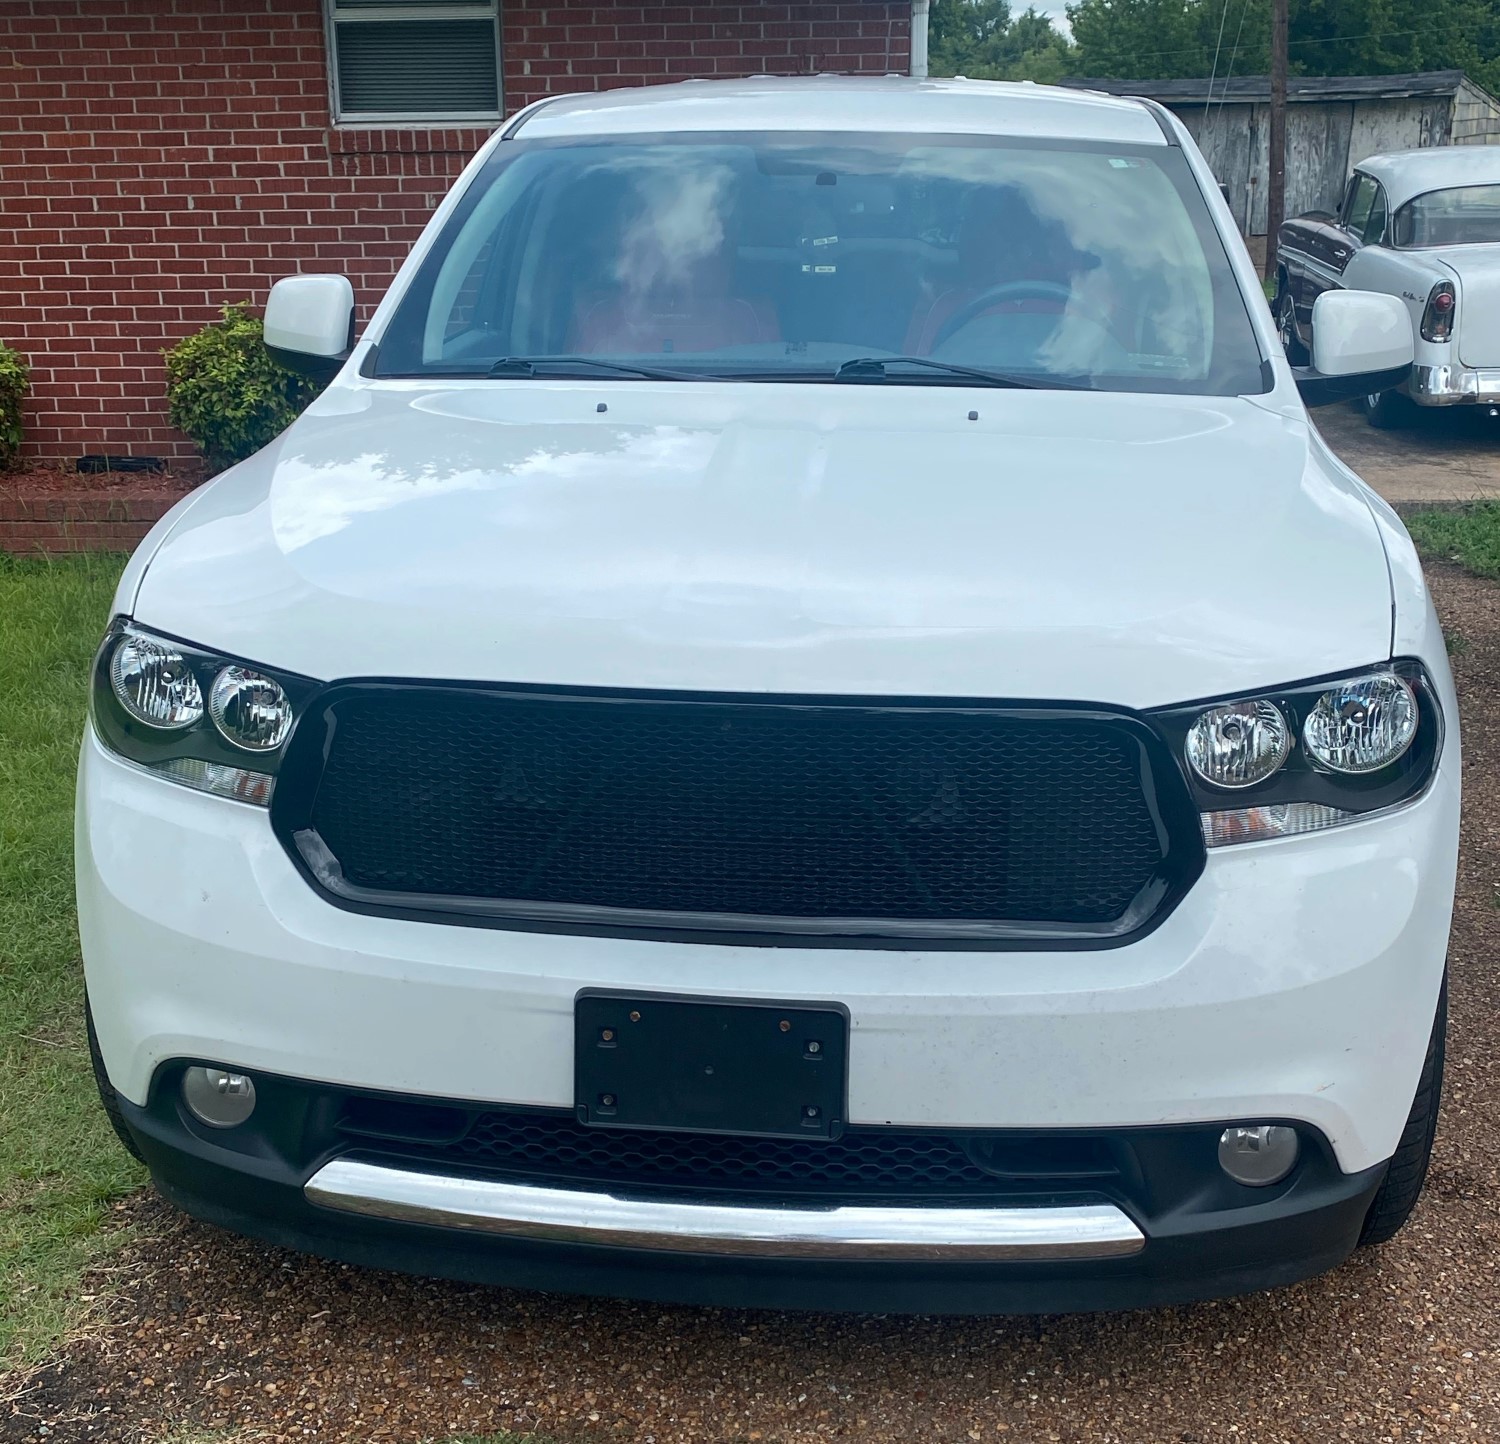 Upgrade Your 2011-13 Dodge Durango with Our New Mesh Grille